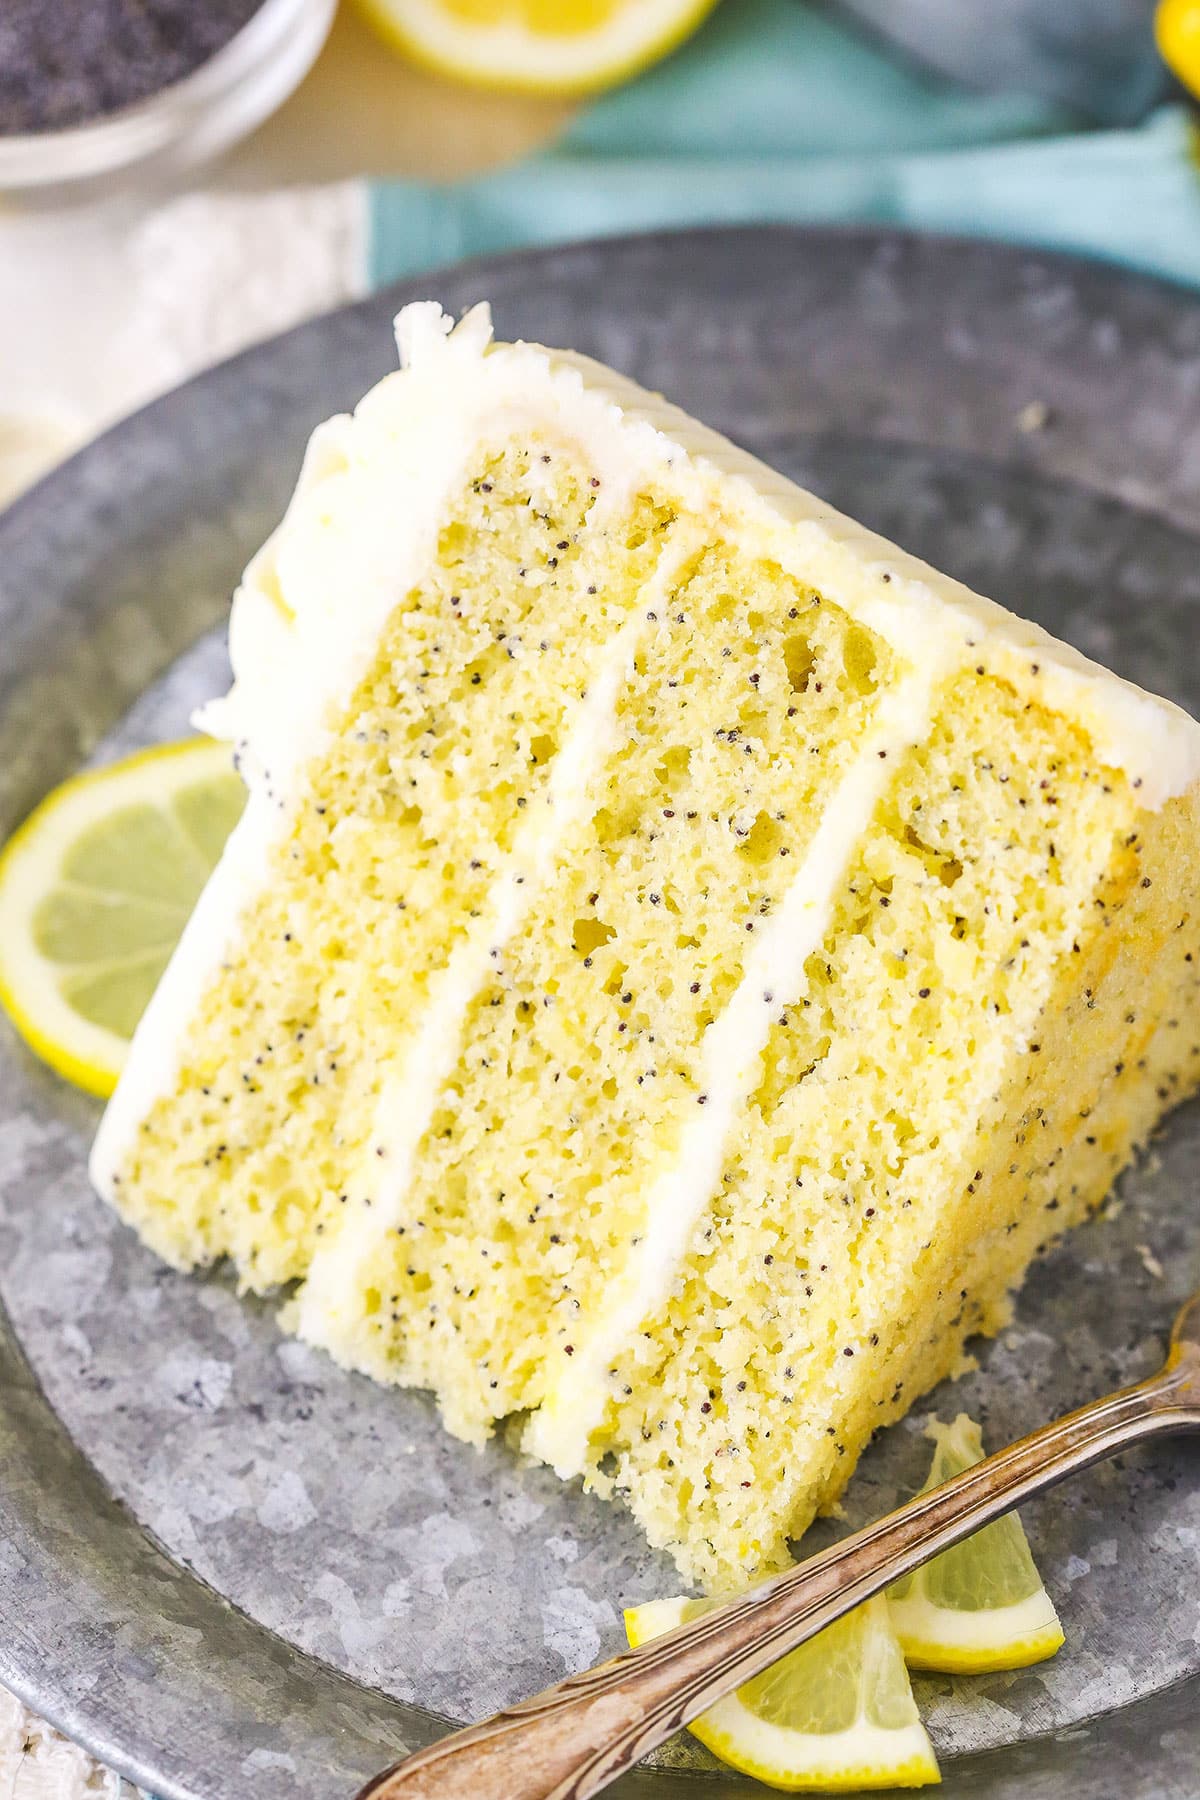 A slice of Lemon Poppyseed Cake next to a fork on a gray plate